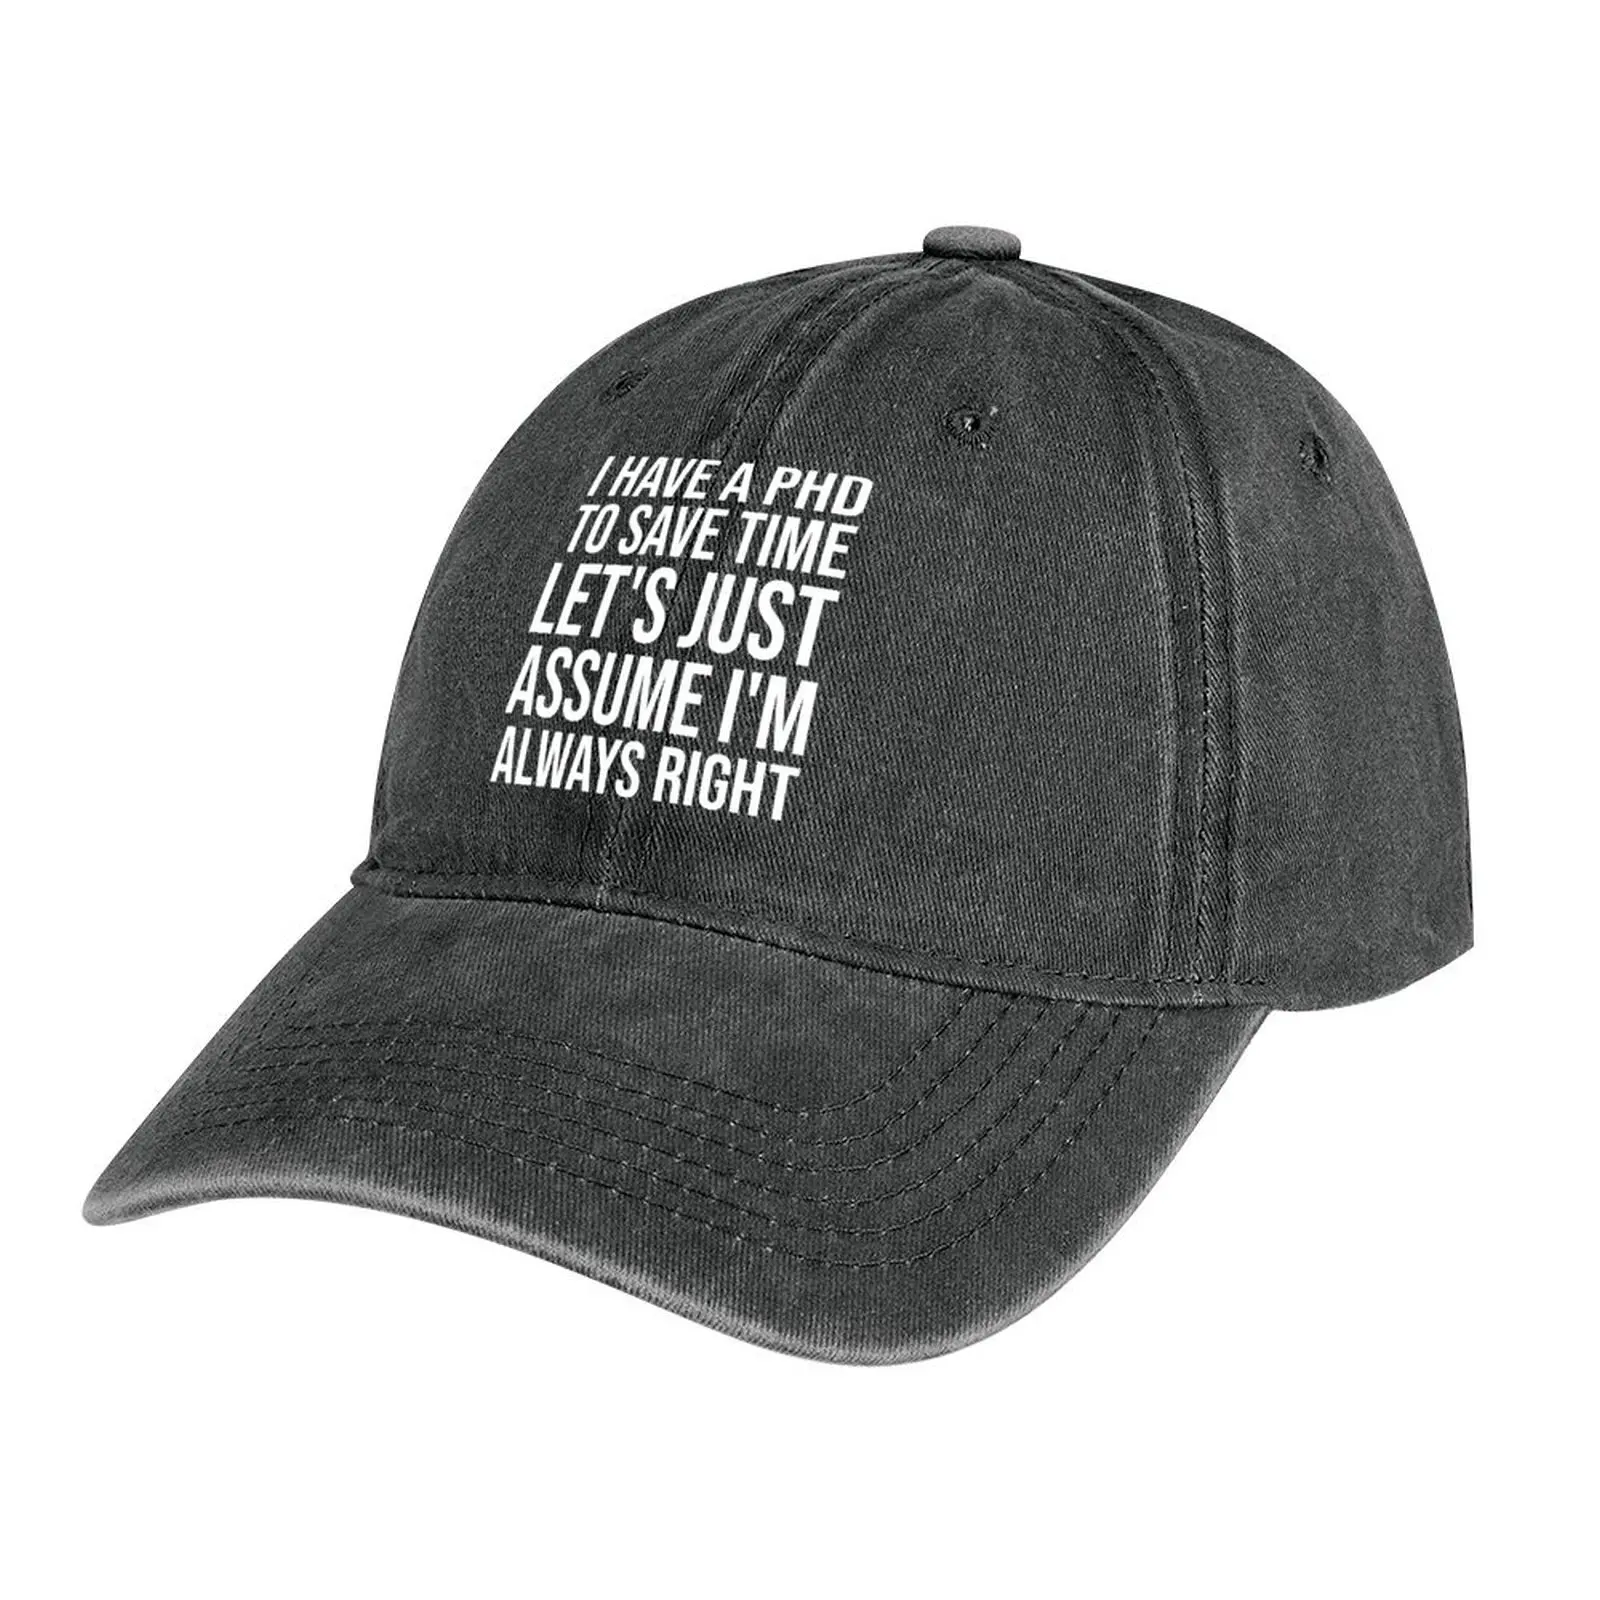 

Copy of I Have A PhD To Save Time Let's Just Assume I'm Always Right Cowboy Hat Beach hard hat Caps Male Women's